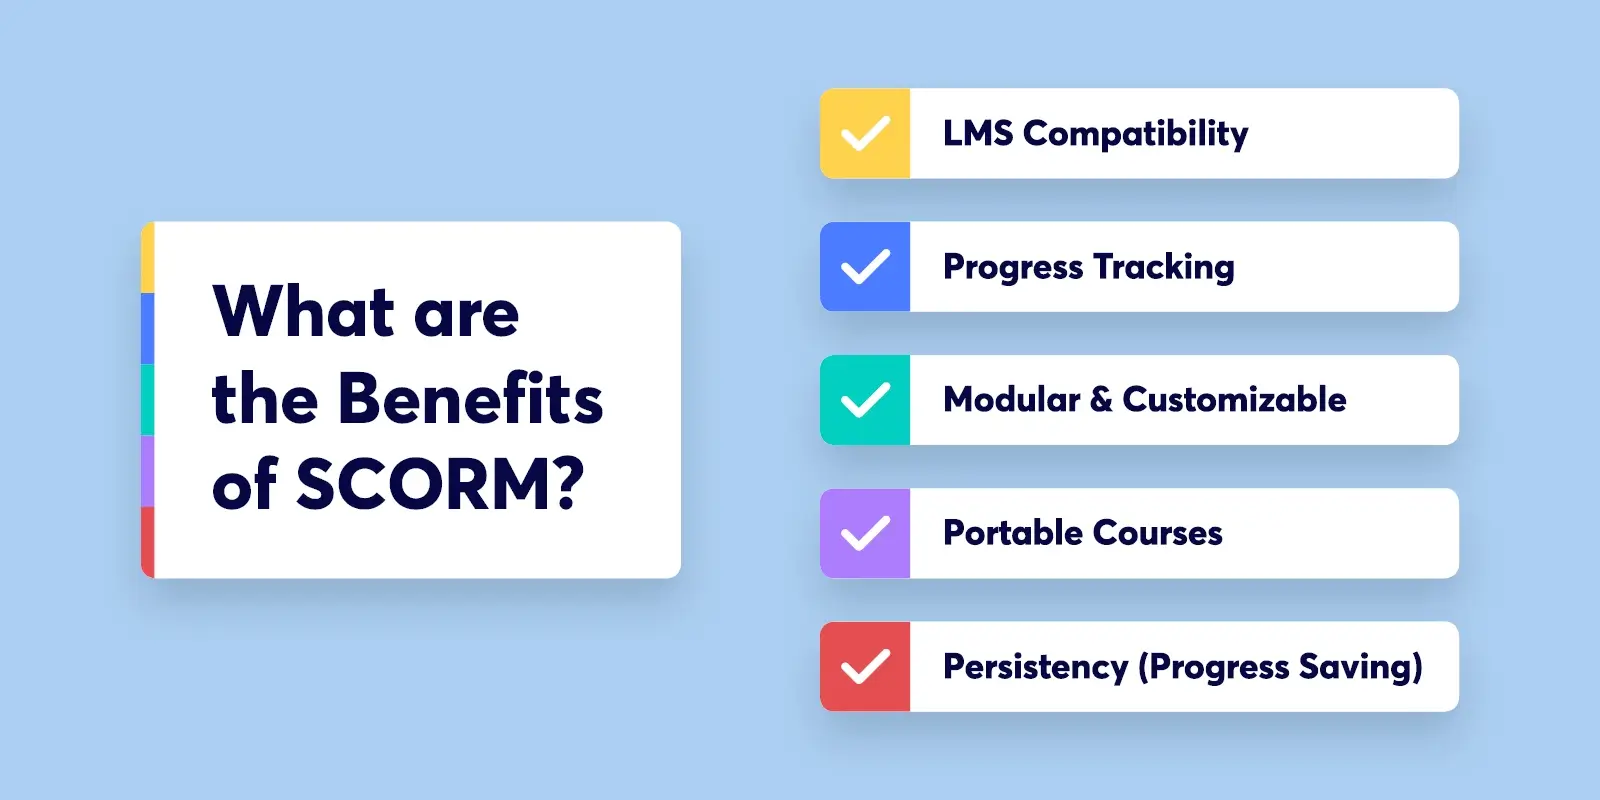 the image showing the 5 benefits of scorm: compatibility, progress tracking, customizable, portable, and persistency